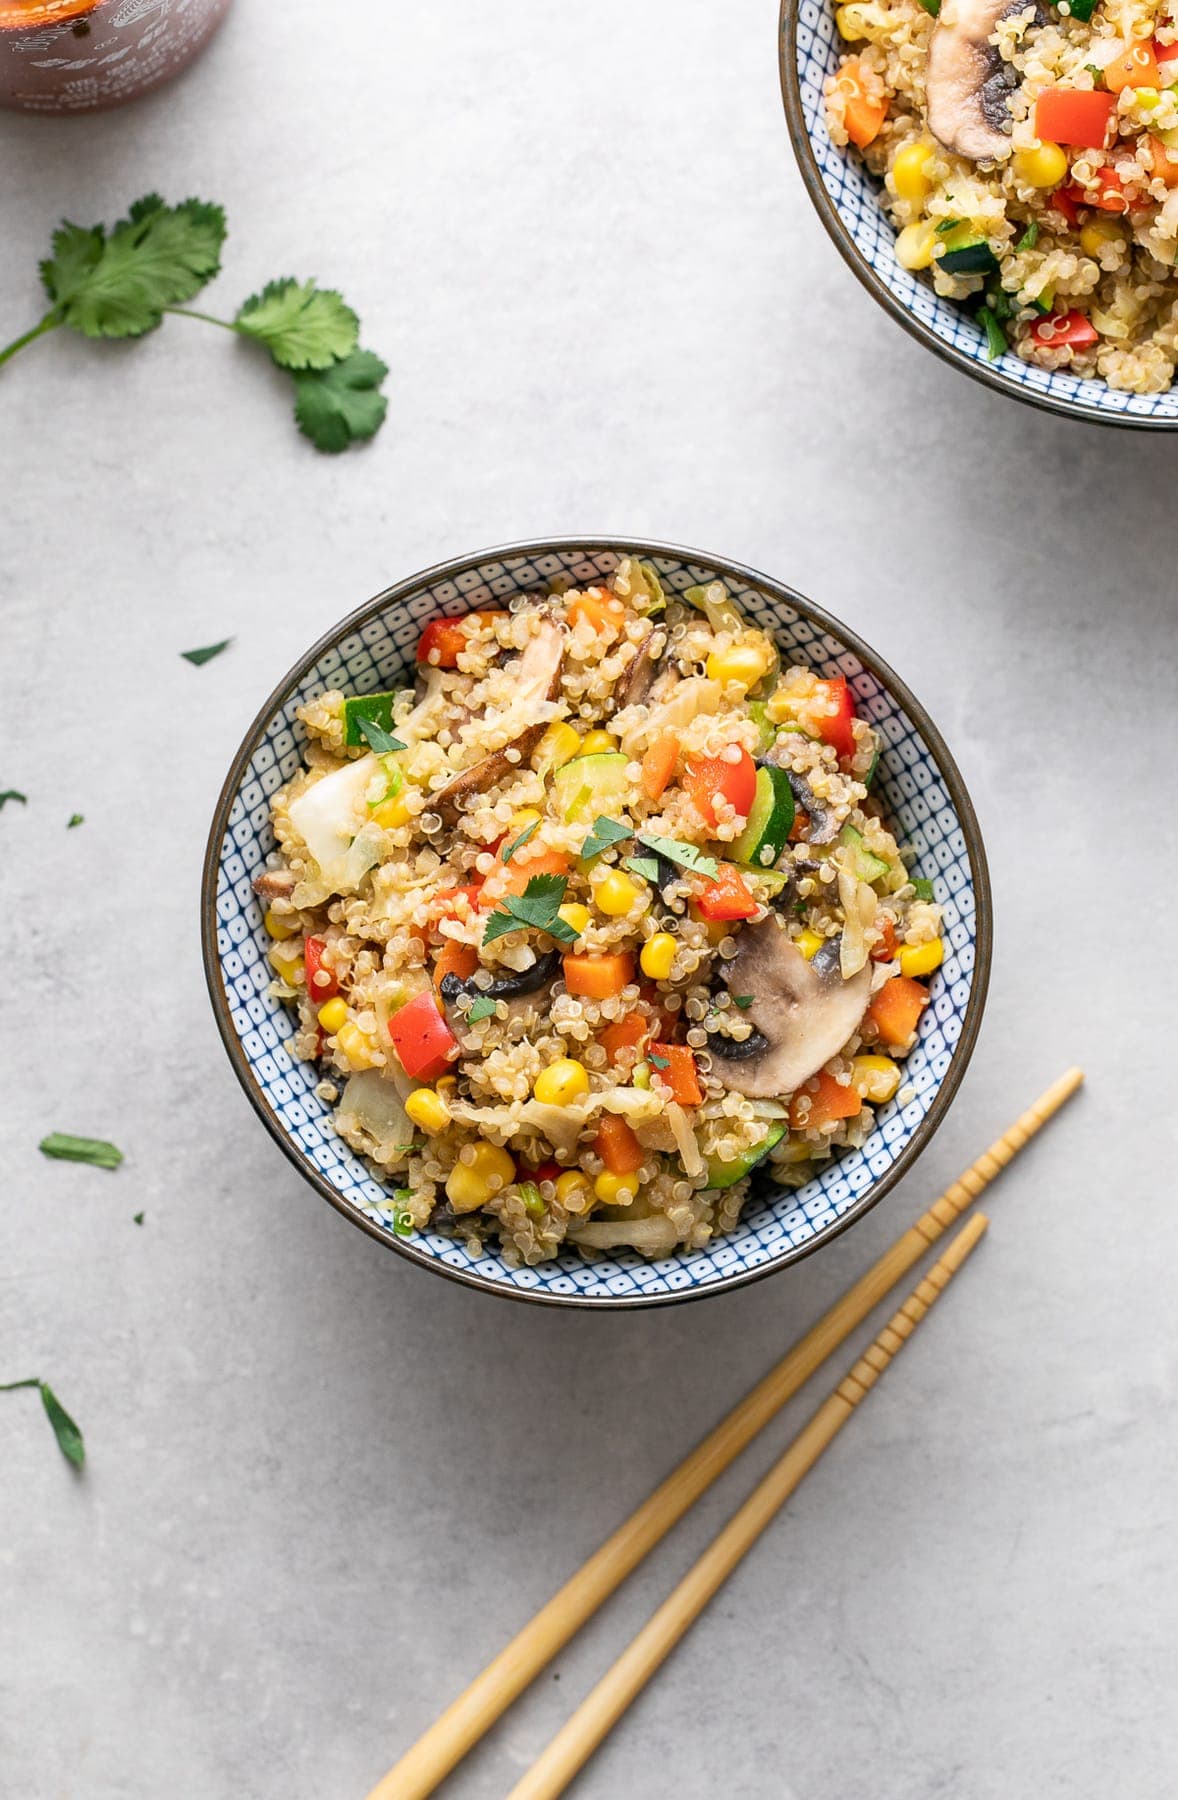 top down view of vegetable quinoa fried rice in a blue and white bowl with items surrounding.